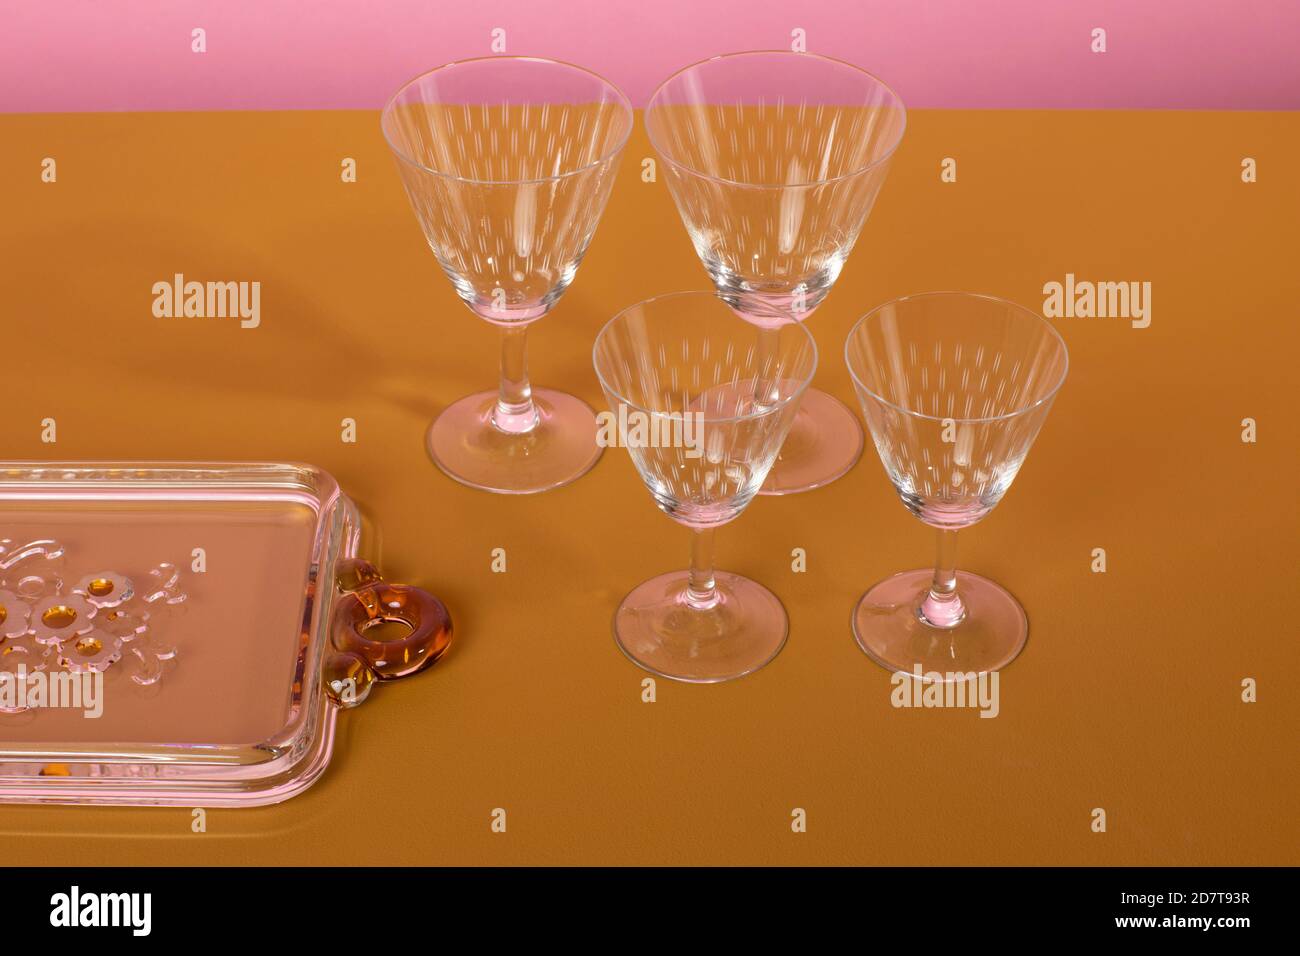 Set of classsic martini cocktail glasses standing next to a glass serving plate on a brown surface and a pink background. Clean minimalistic elegant s Stock Photo